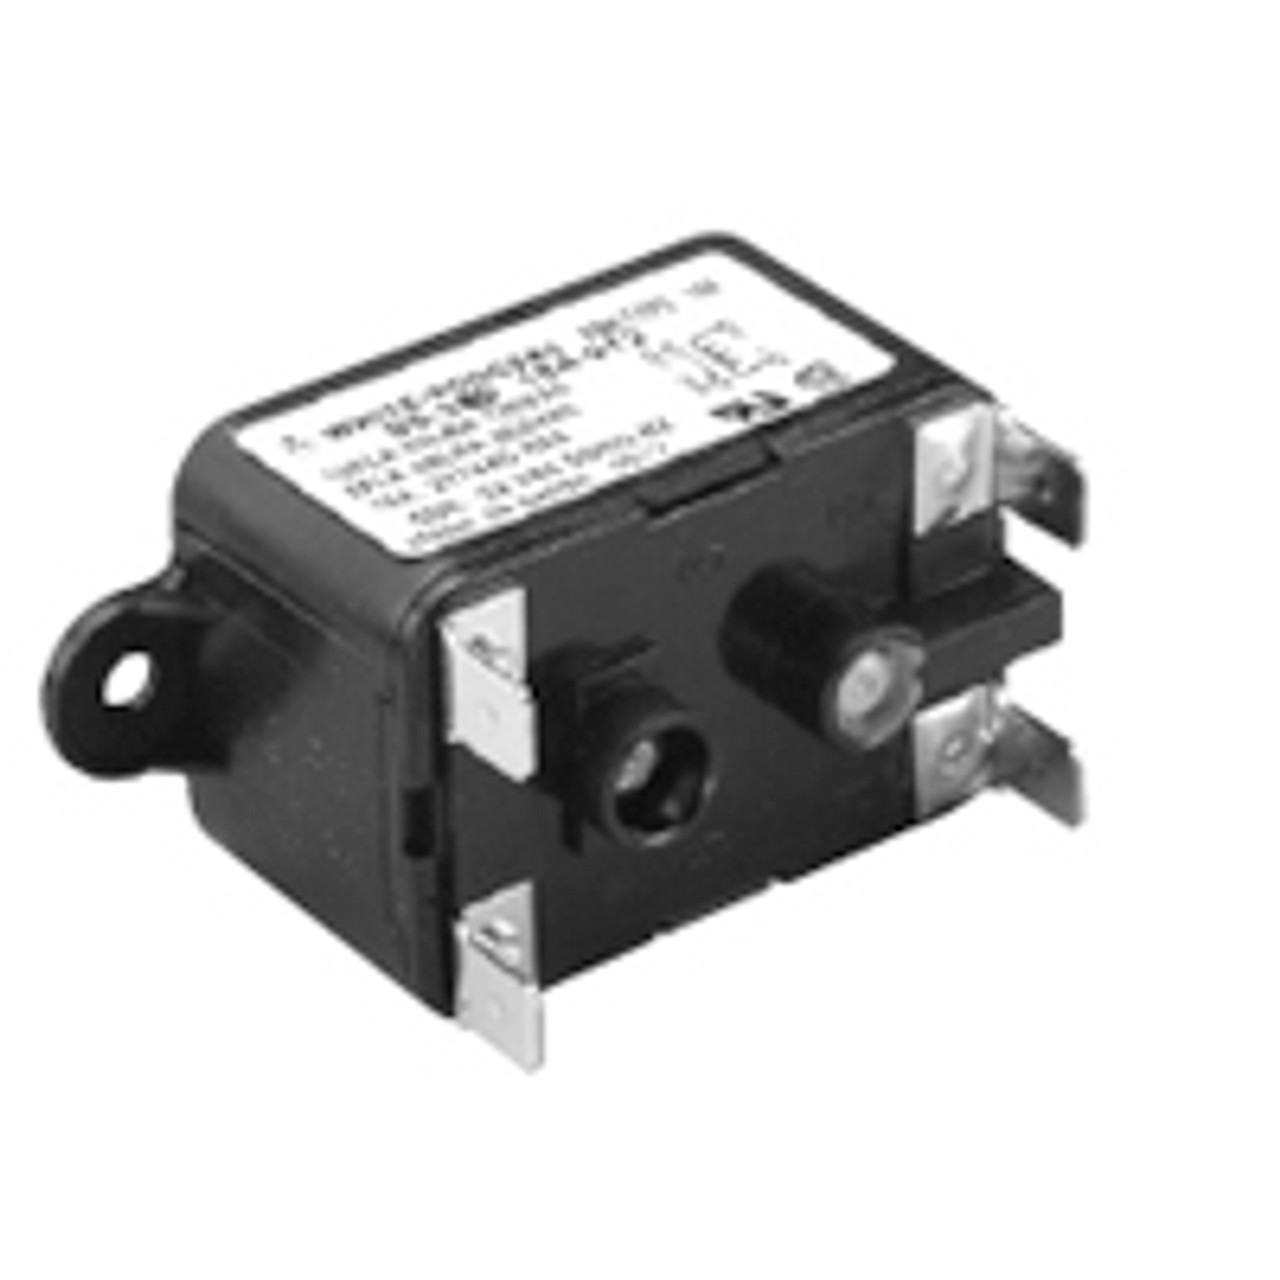 Stancor / White Rodgers 184-917 Power Relays